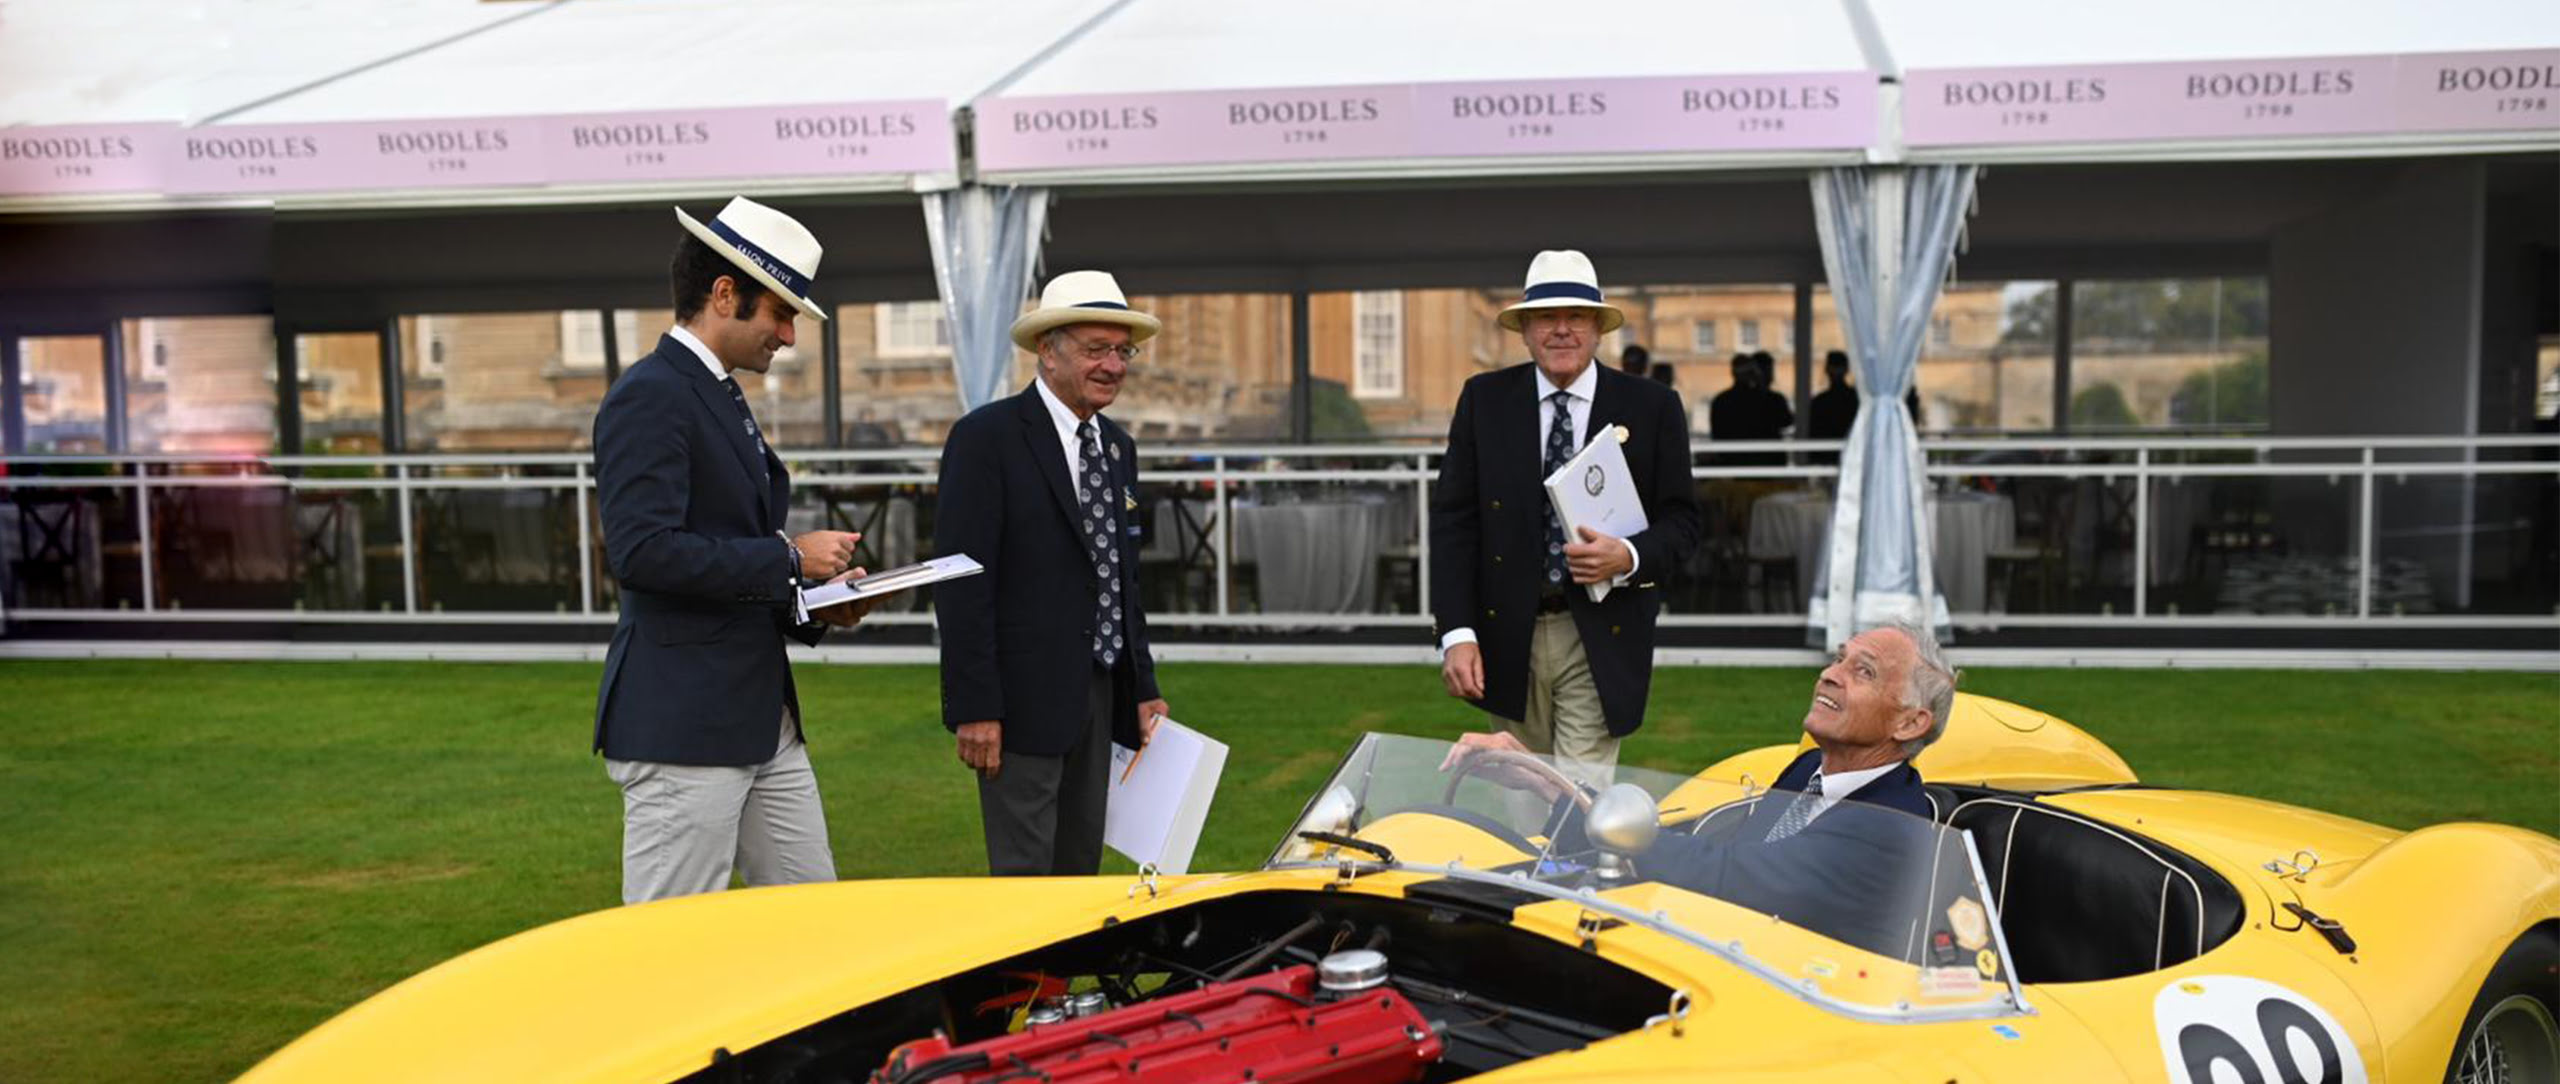 The Hybrid Judging experiment was tested successfully at Salon Prive